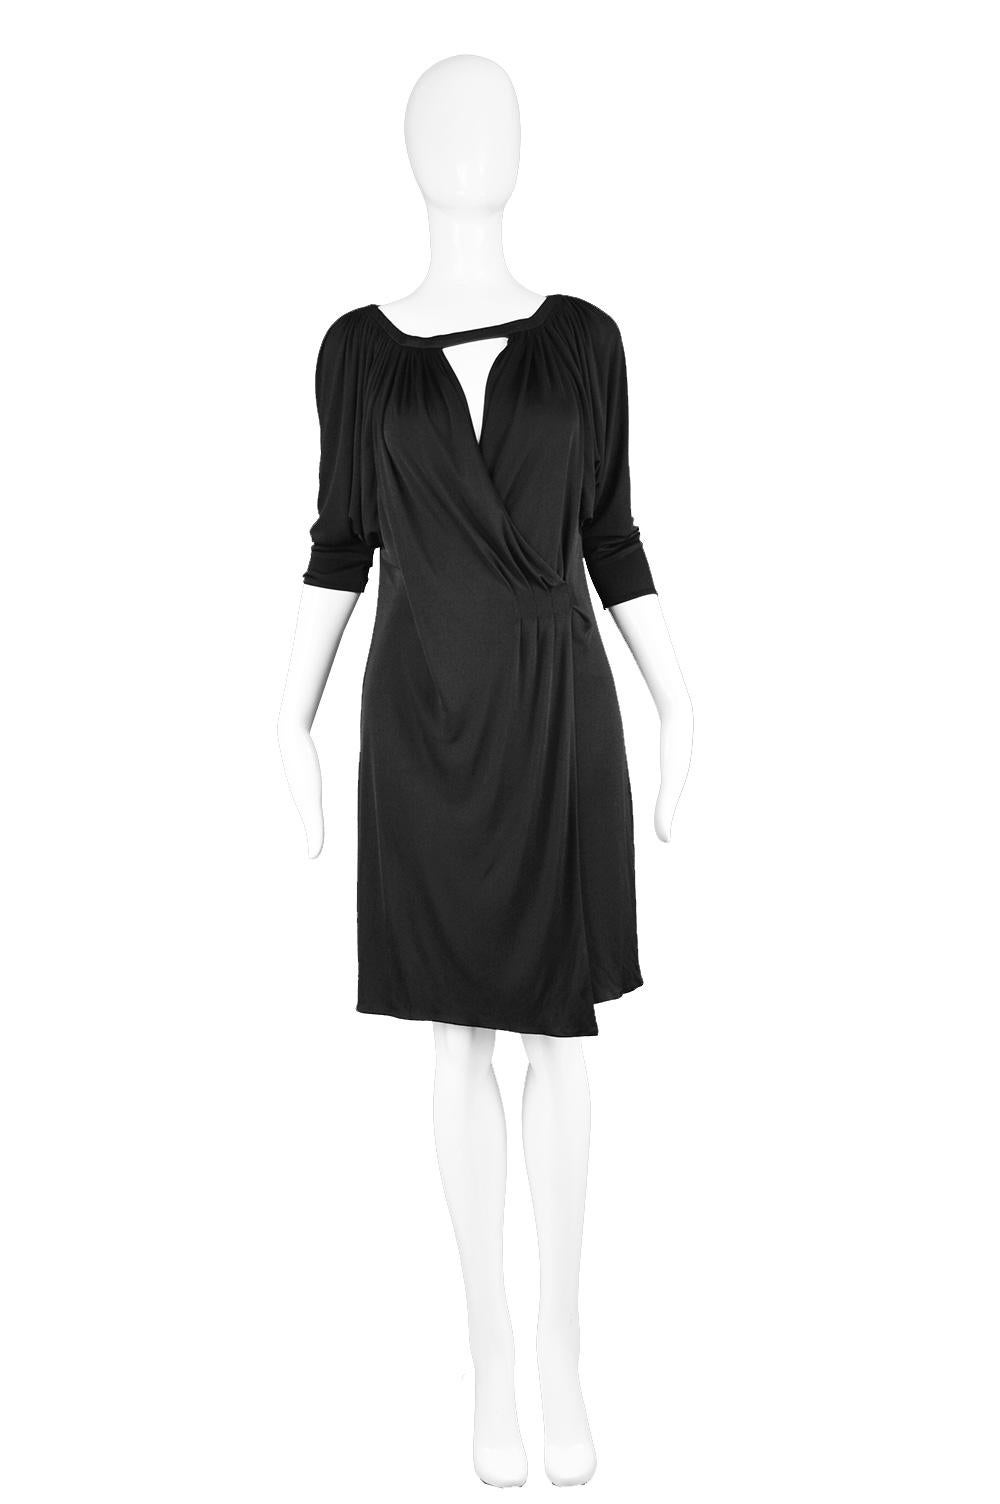 A fabulous vintage women's little black dress from the Spring 2001 collection by luxury Italian fashion designer, Donatella Versace for Gianni Versace Couture. In a fluid black jersey that gives incredible drape and a timeless look. With a batwing